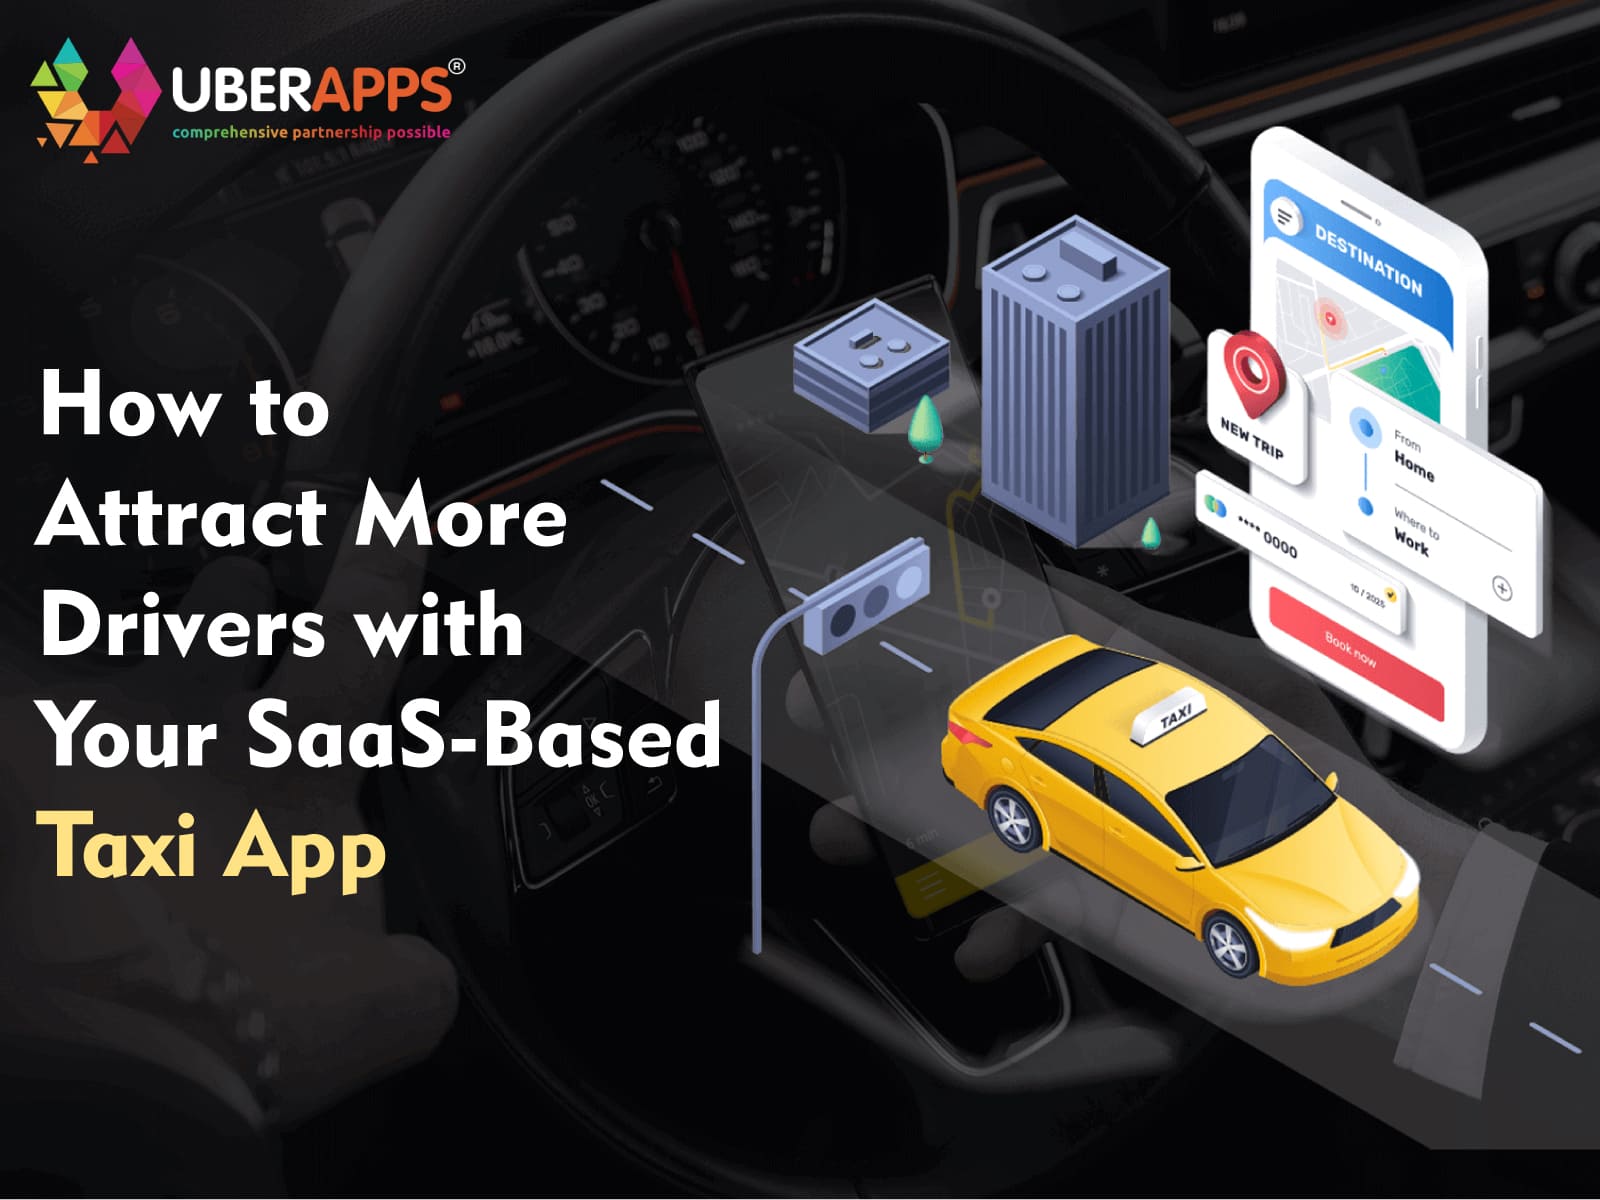 How to Attract More Drivers with Your SaaS-Based Taxi App